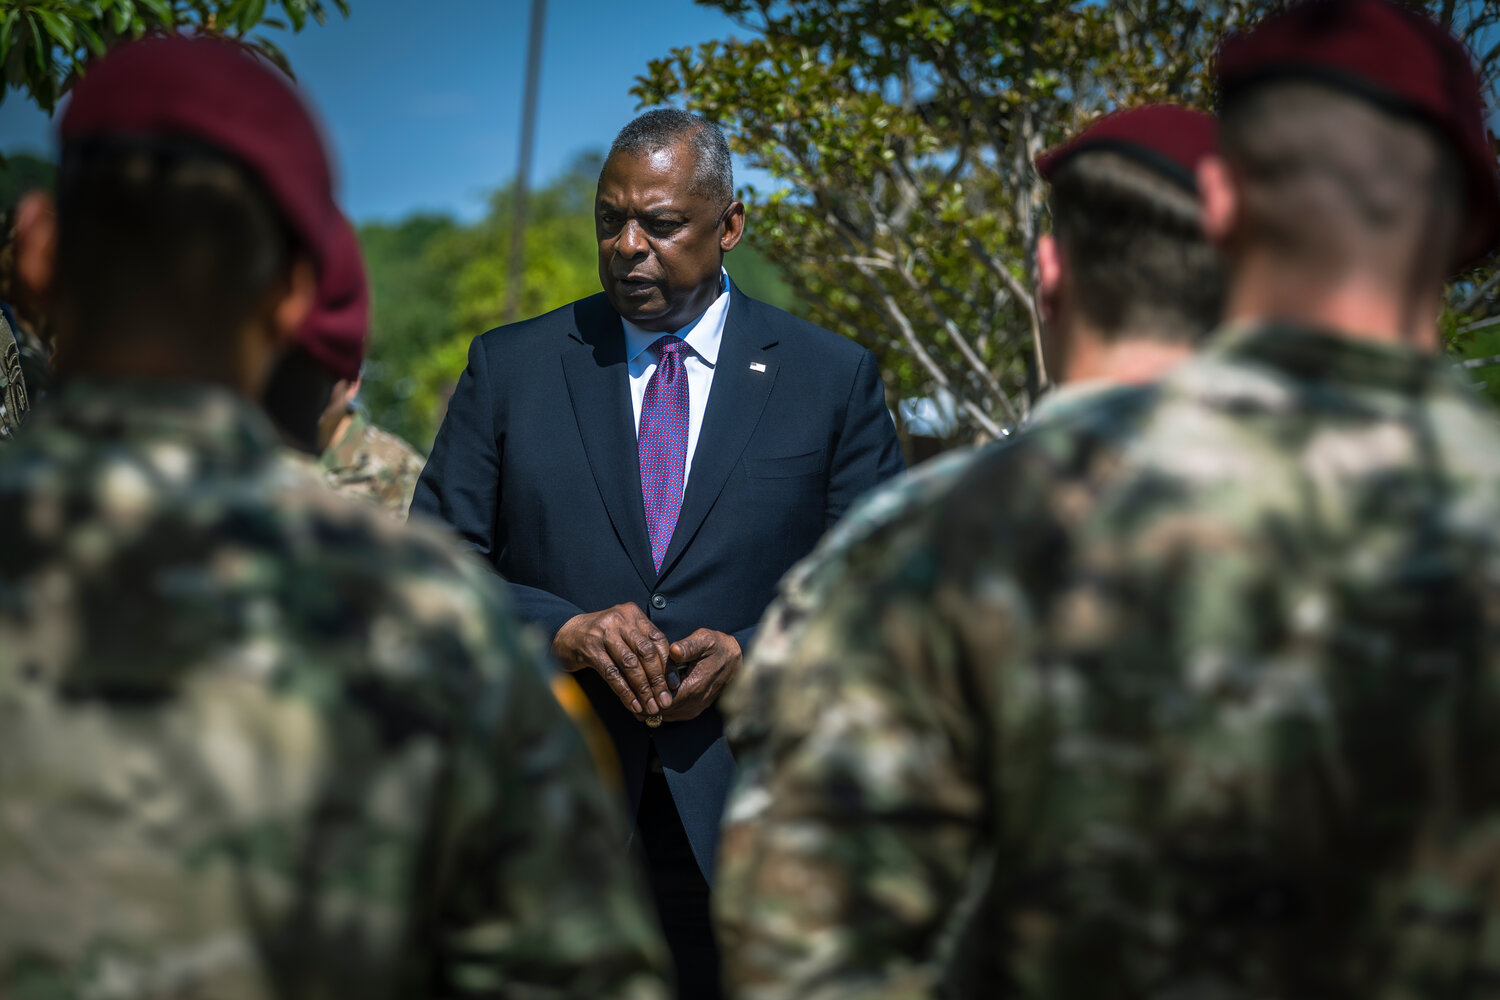 Secretary of Defense Lloyd J. Austin III speaks with soldiers of the 3rd Brigade Combat Team on Friday at Fort Bragg.